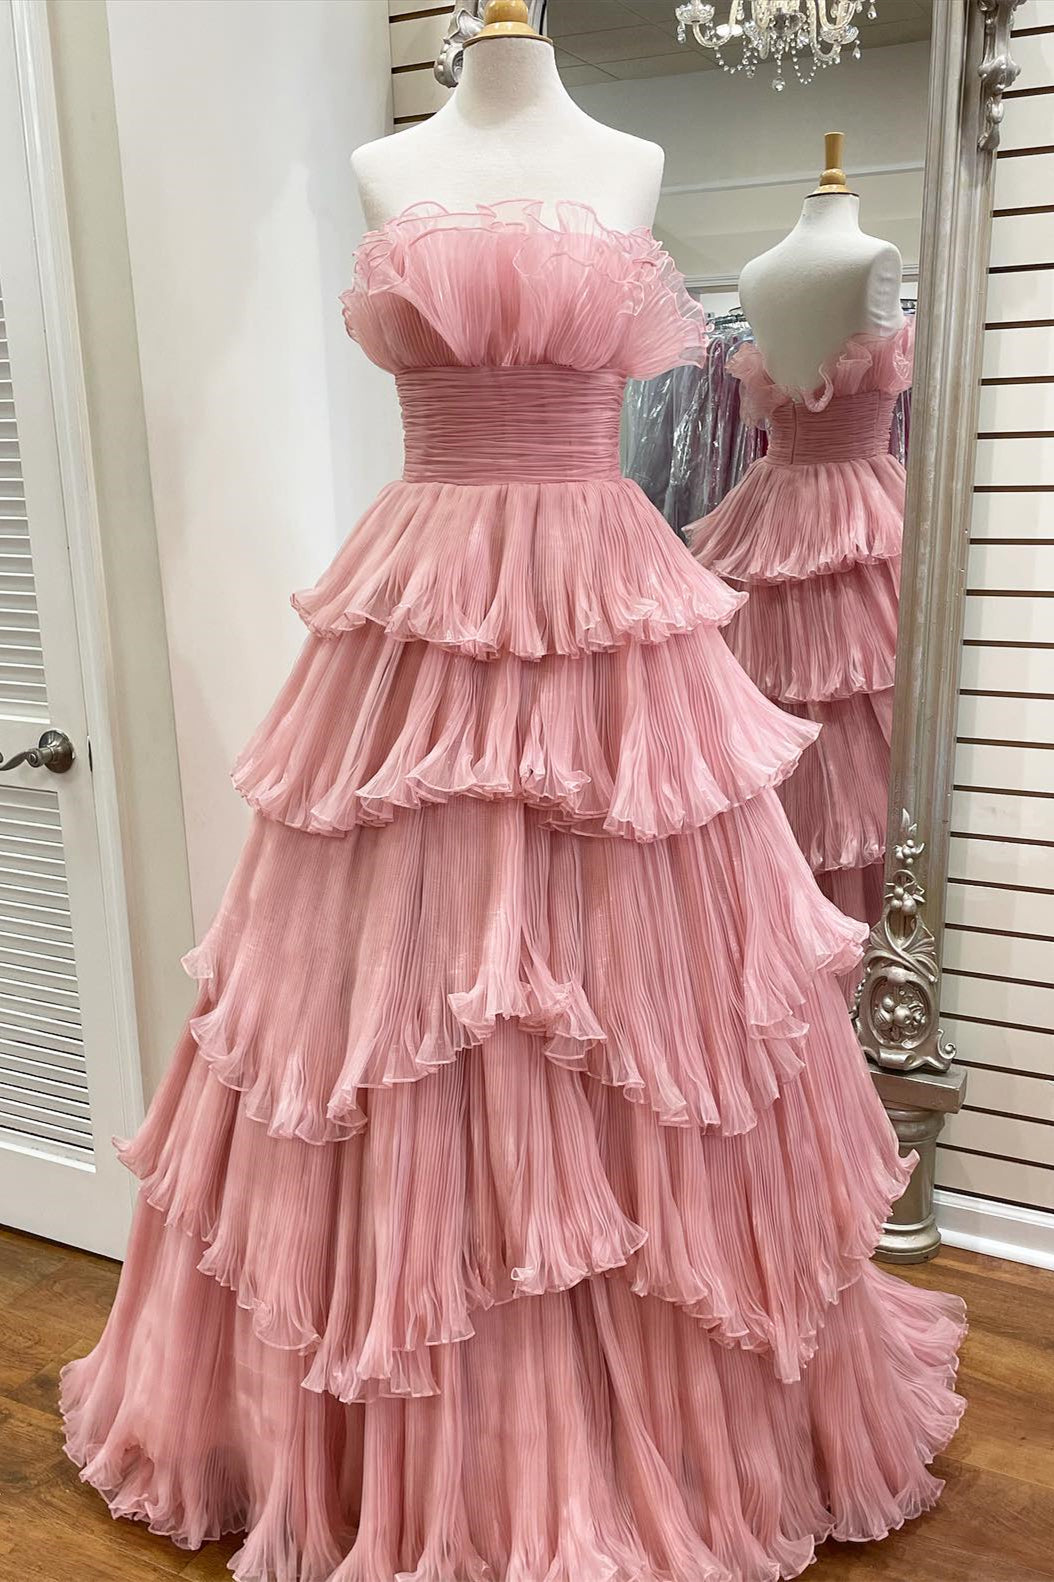 Candy Pink Tulle A-line Strapless Ruffles layers Long Prom Dress